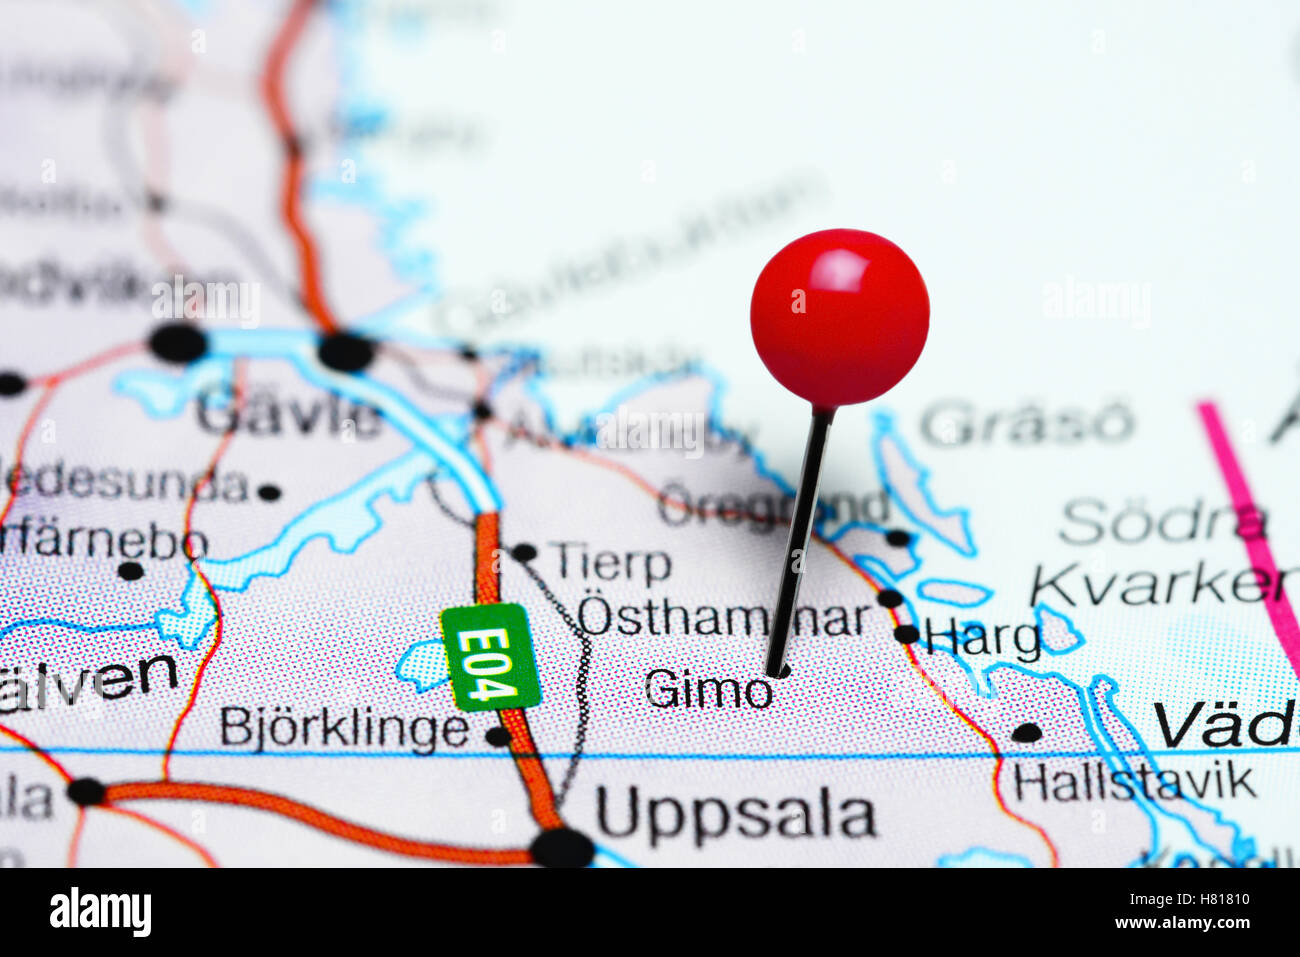 Gimo pinned on a map of Sweden Stock Photo